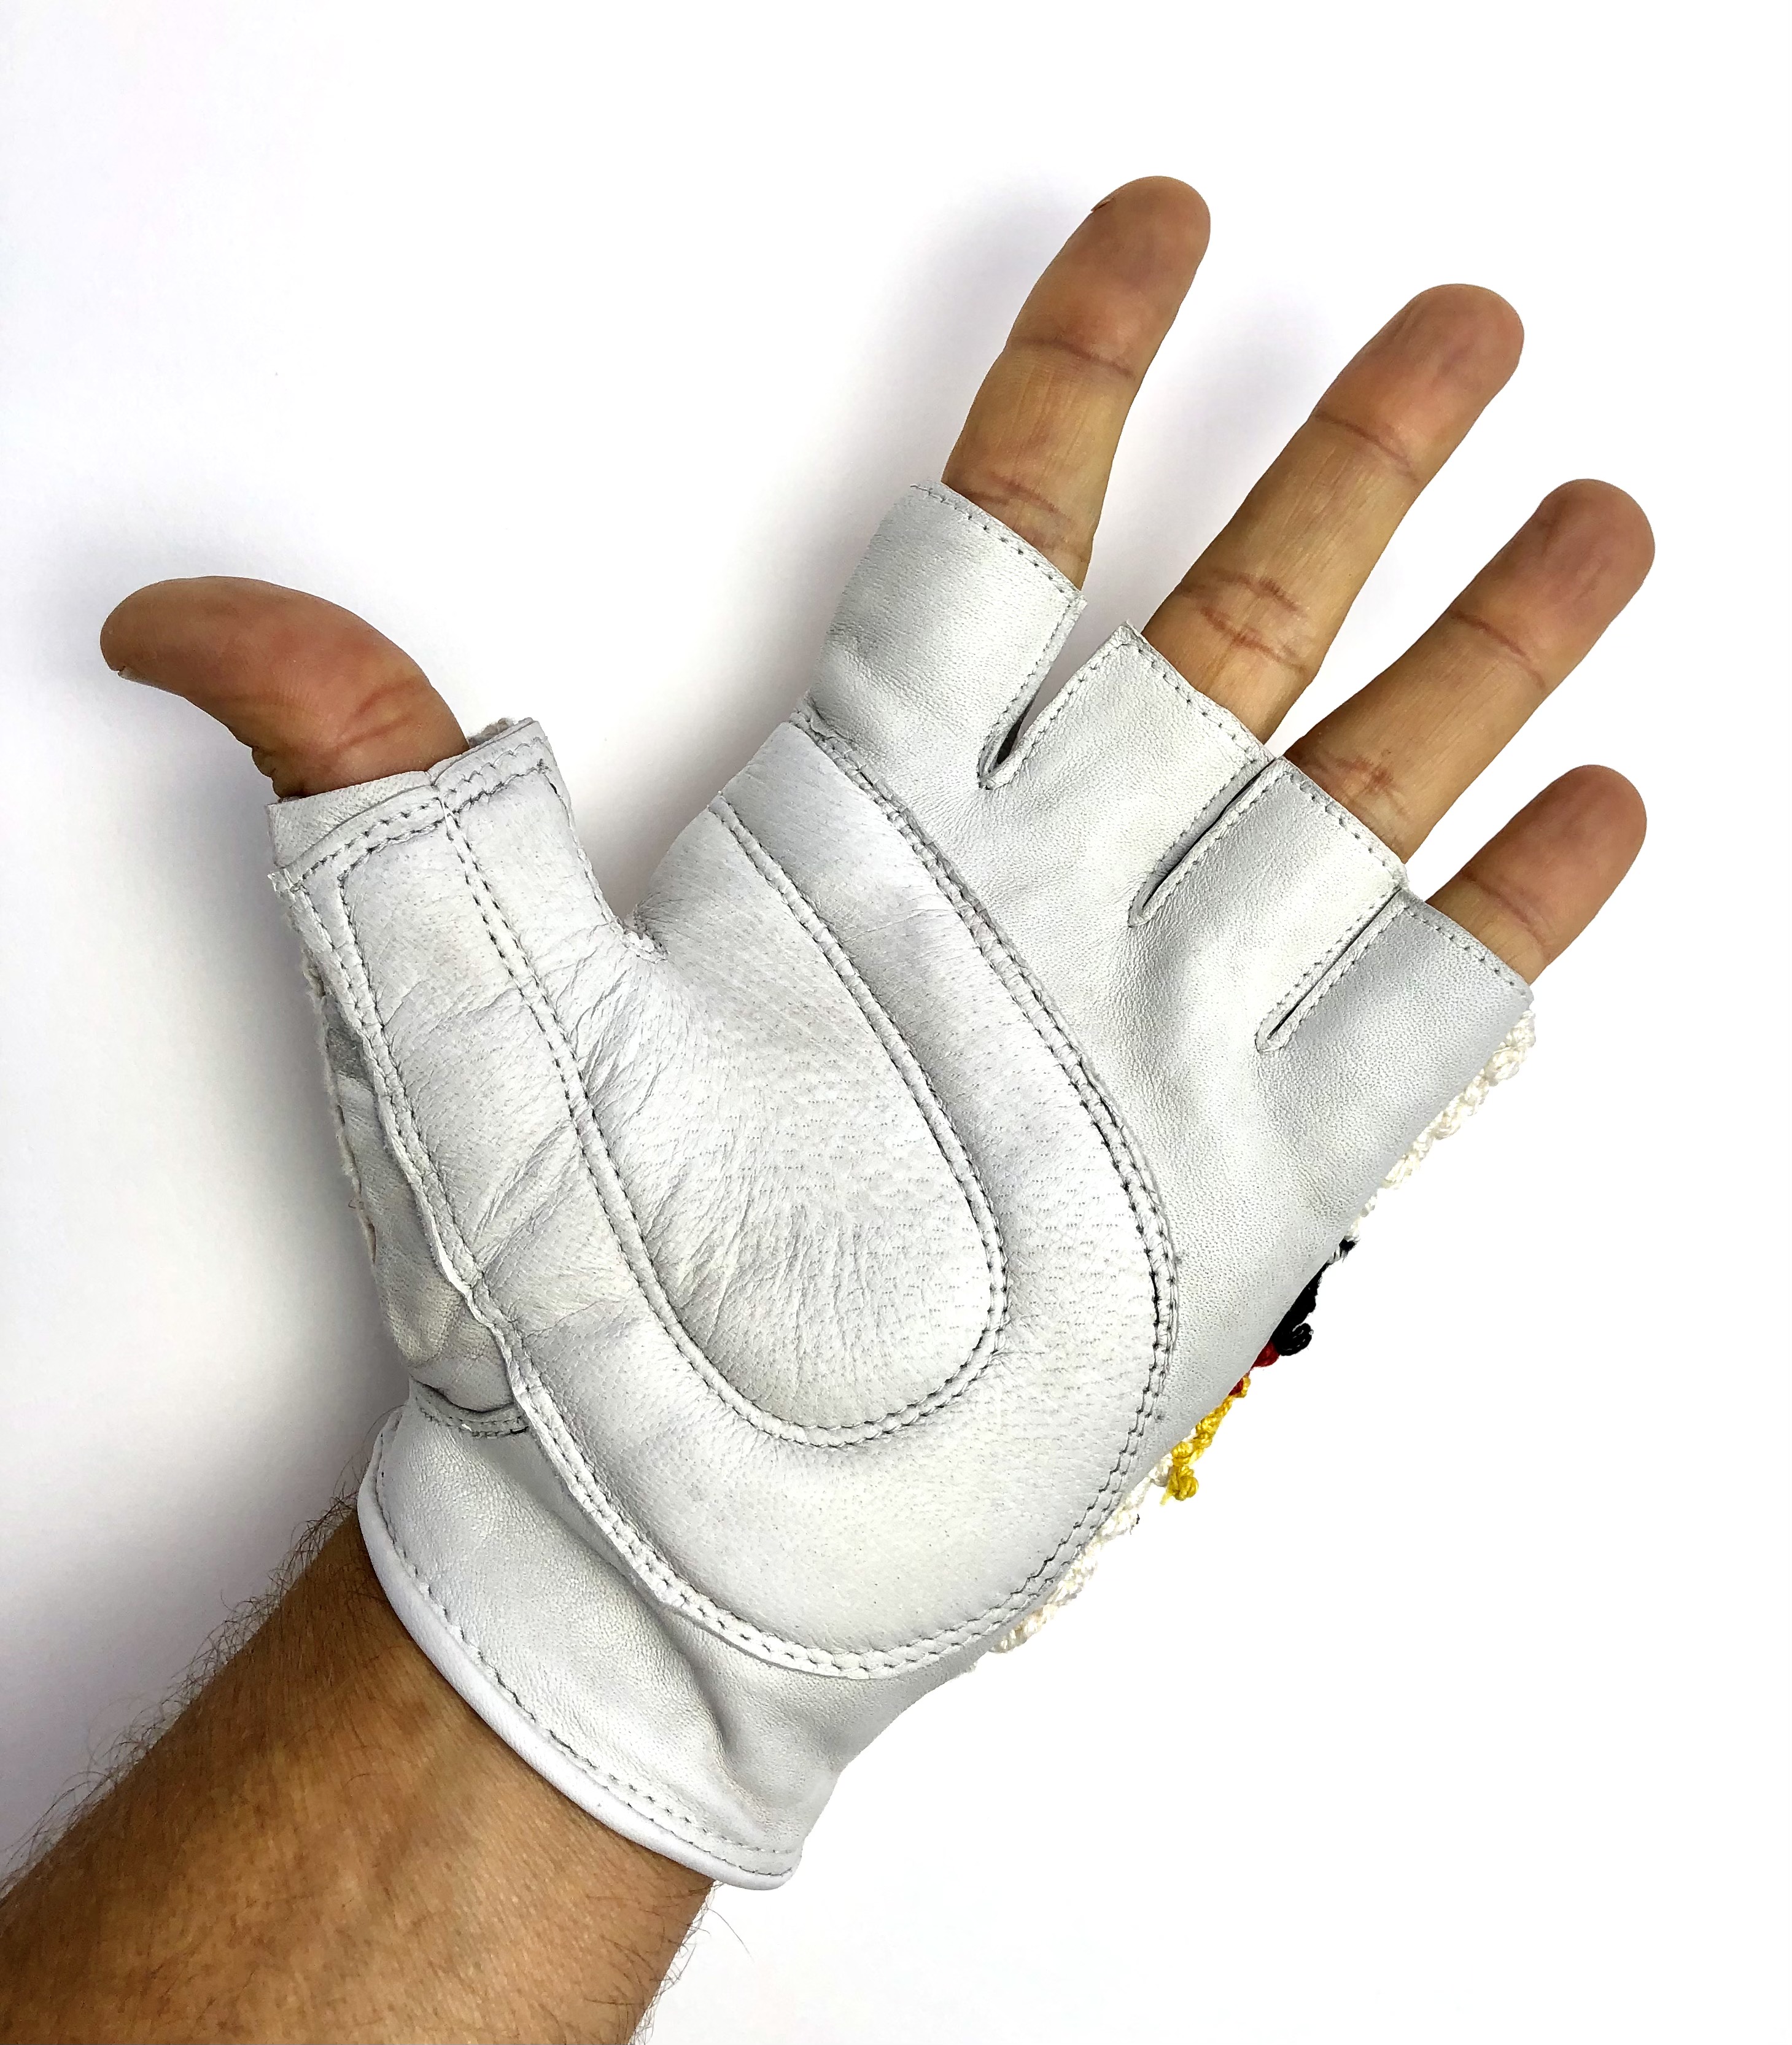 Original GANT 1970s vintage bicycle gloves with chrocheted upper hand Size 9